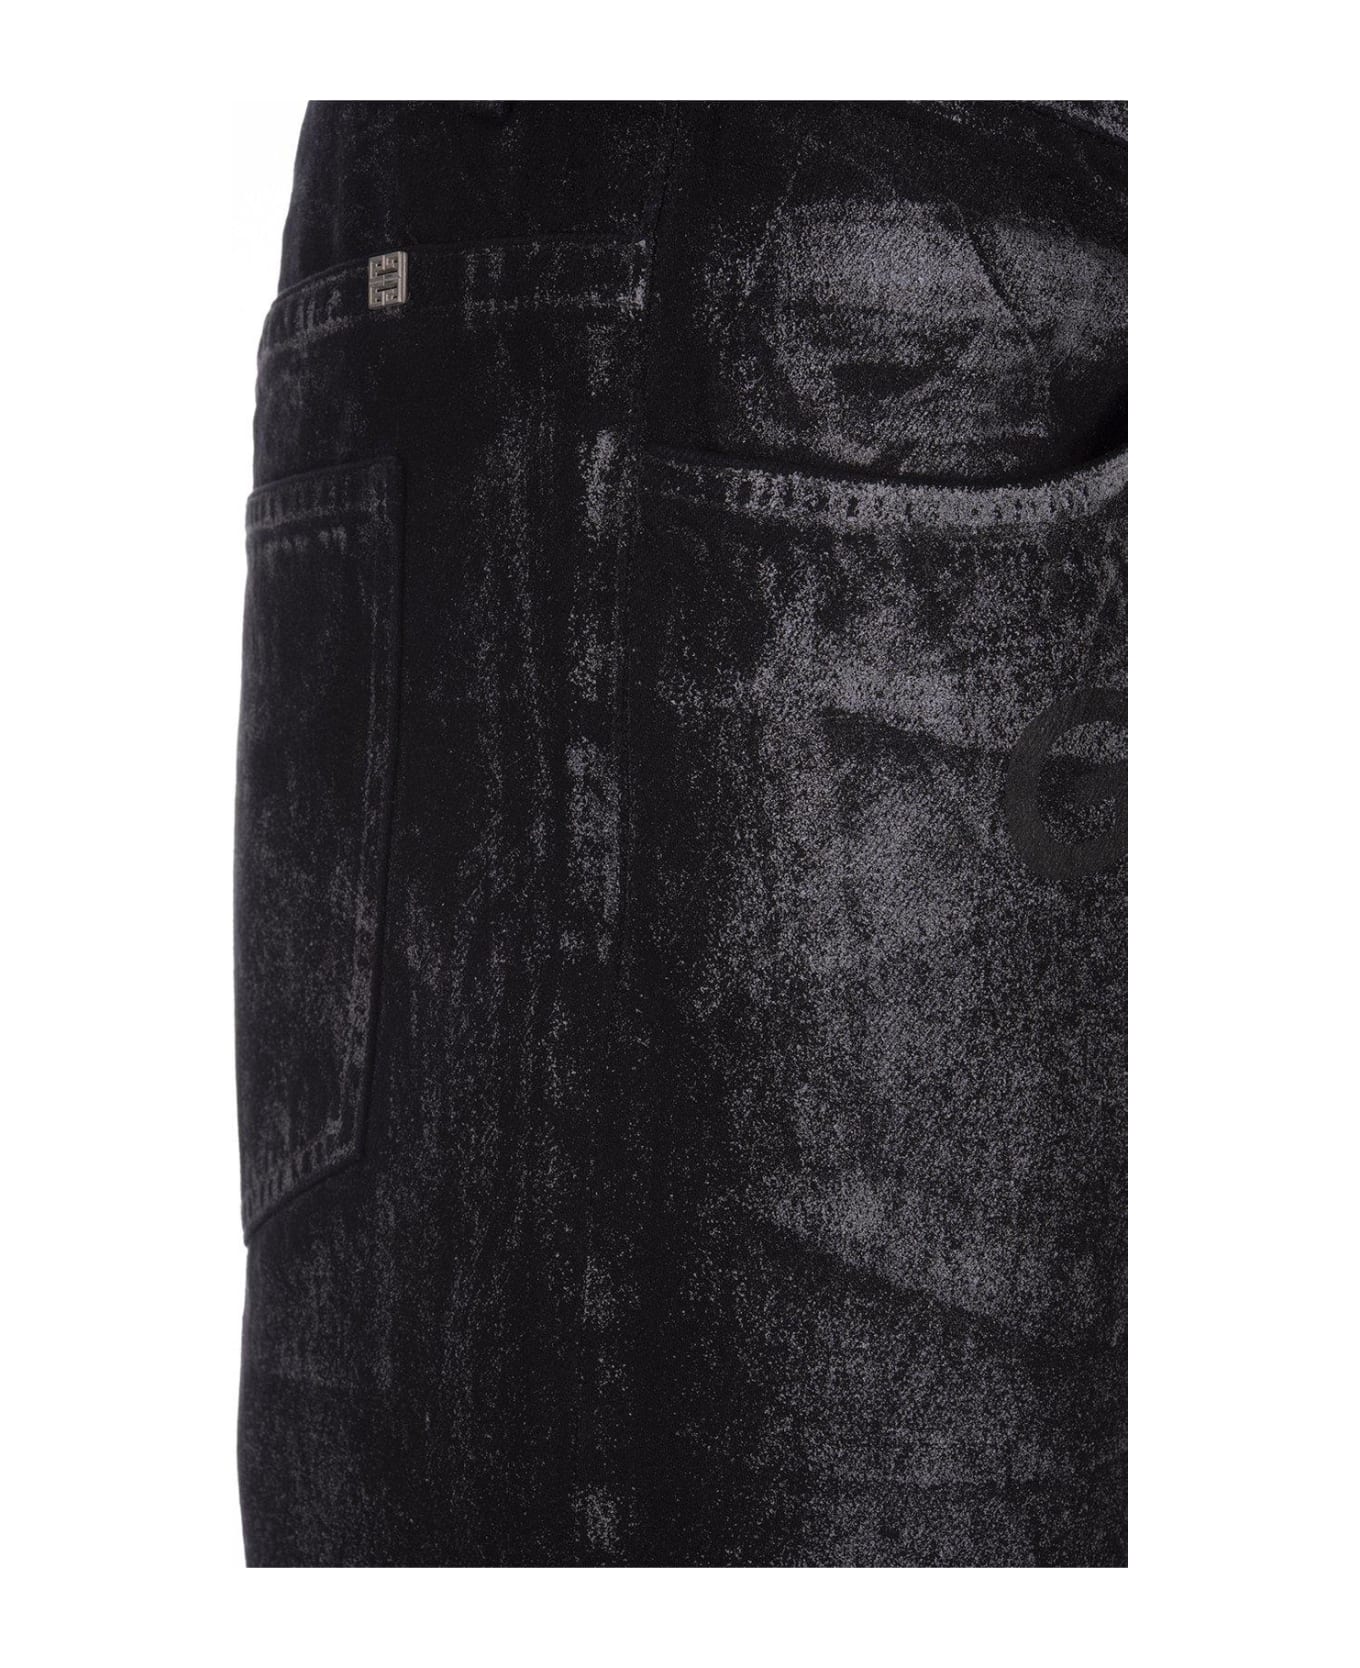 Givenchy Black And Grey Straight Jeans With Reflective Painted Pattern - Nero デニム